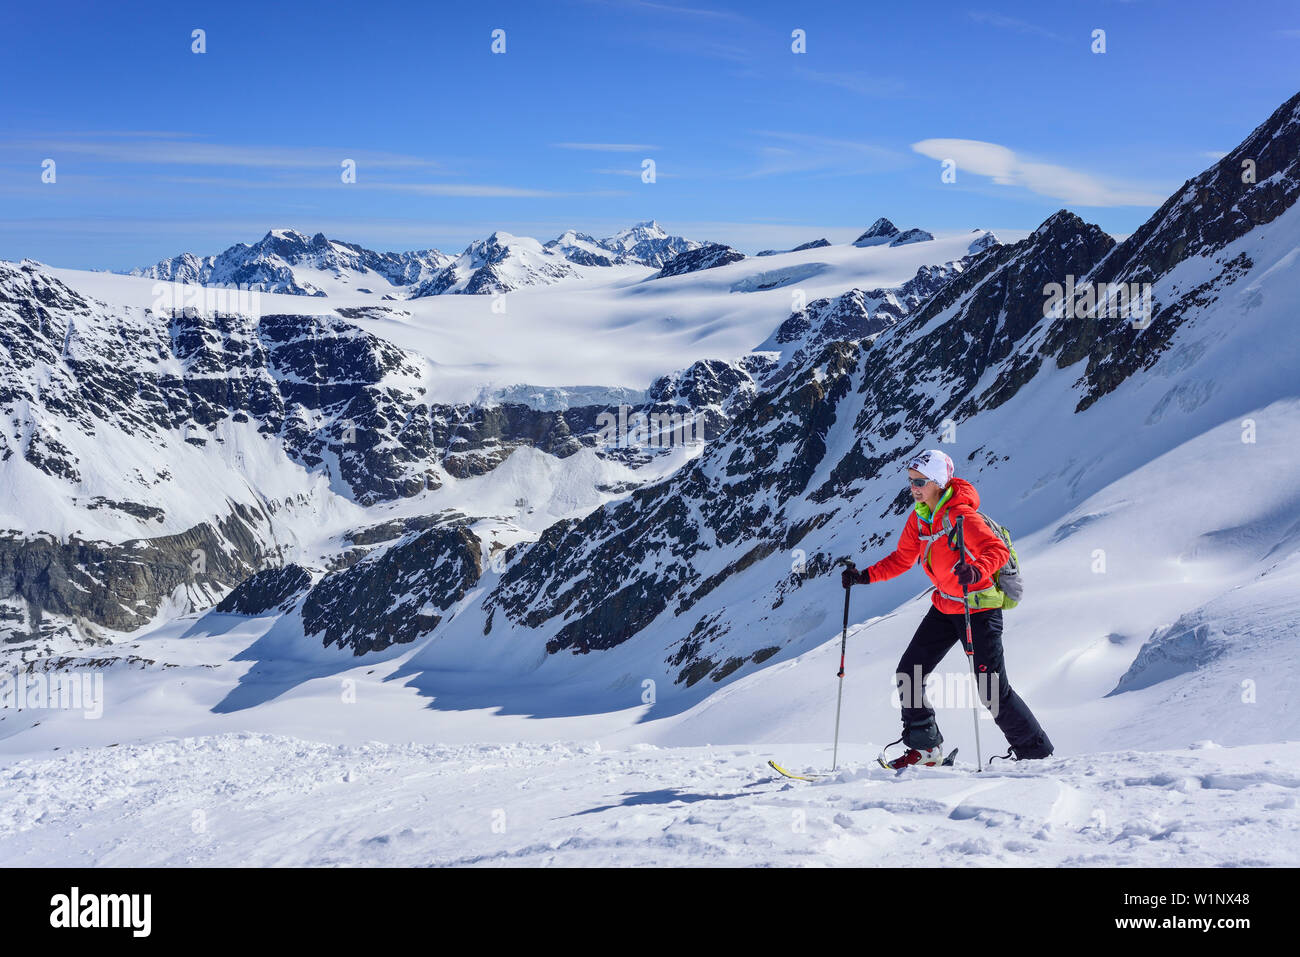 Woman back-country skiing ascending towards Aeusserer Baerenbartkogel, Aeusserer Baerenbartkogel, valley of Langtaufers, Vinschgau, Oetztal Alps, Sout Stock Photo